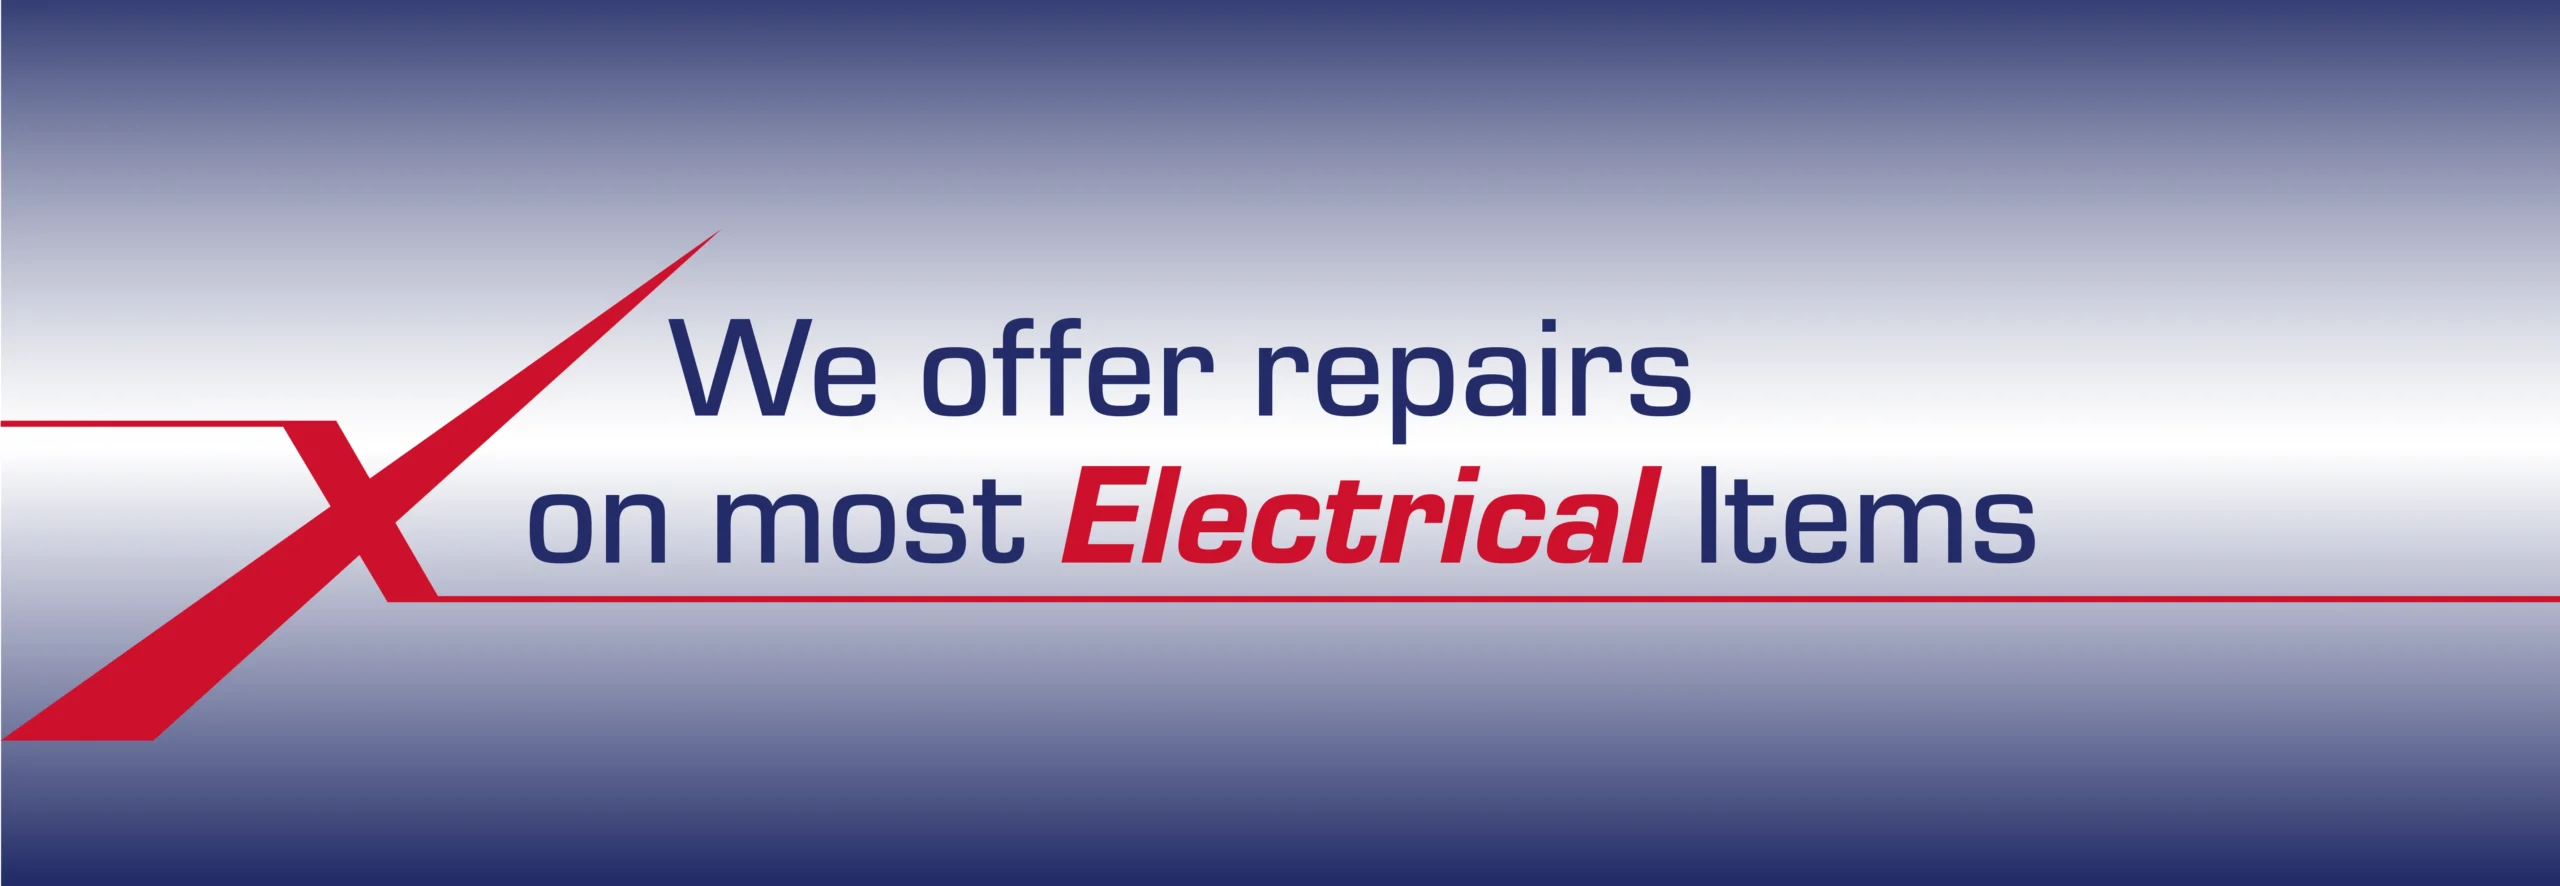 We offer repairs on most Electrical Items